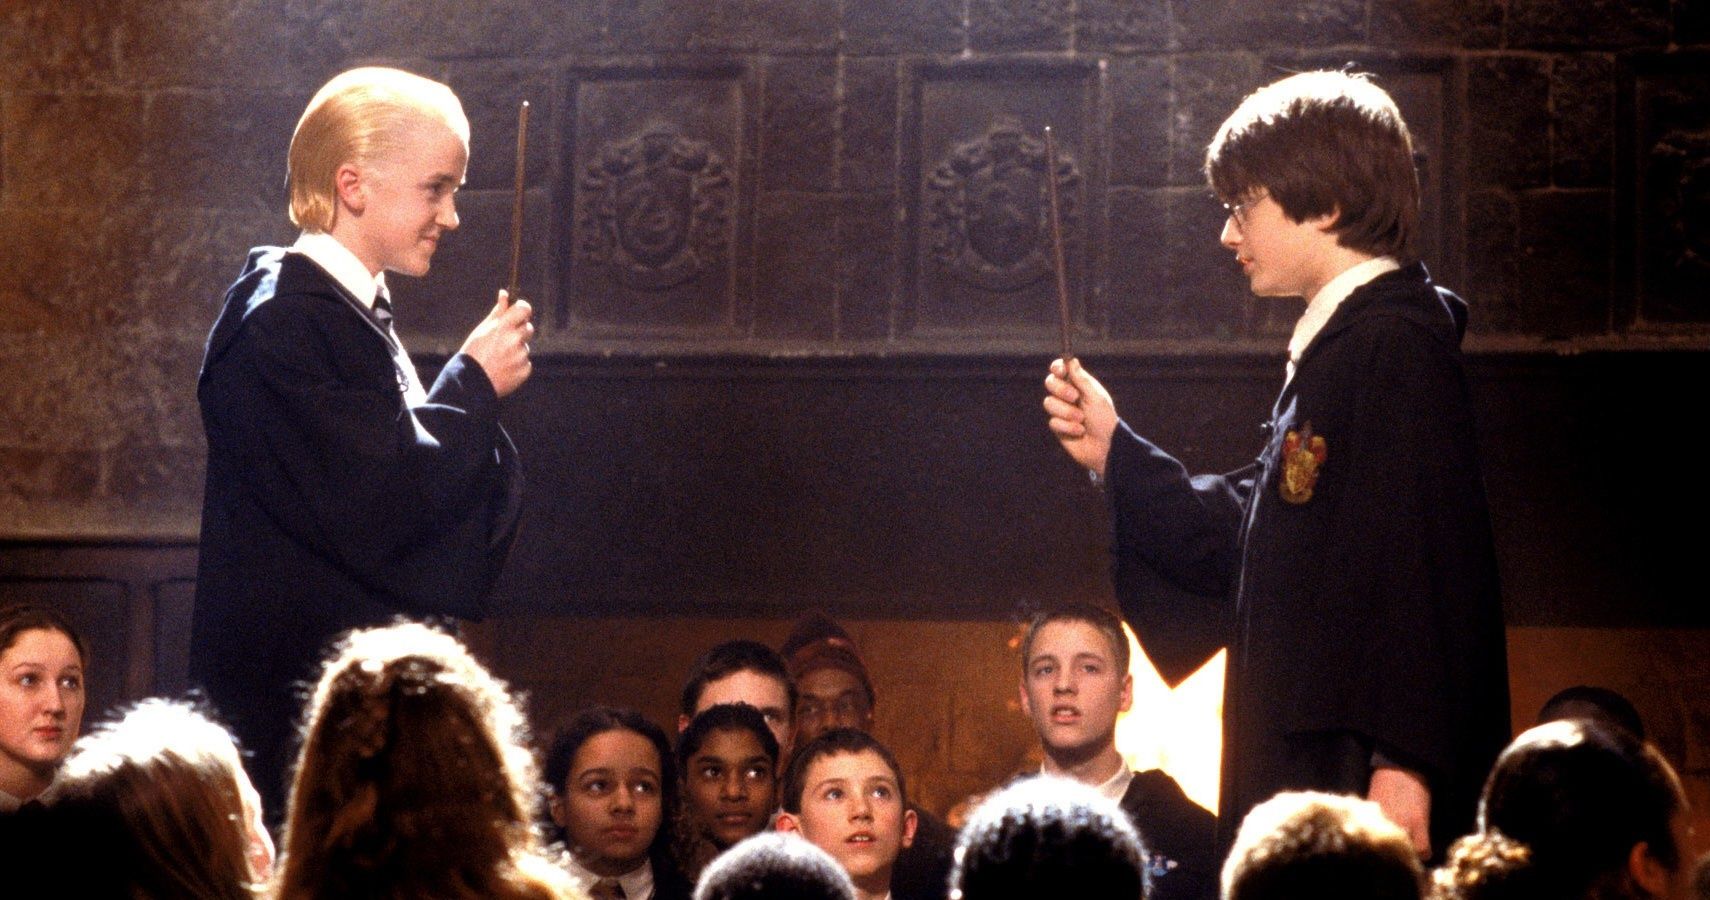 Harry Potter and Draco Malfoy Duel in Chamber of Secrets